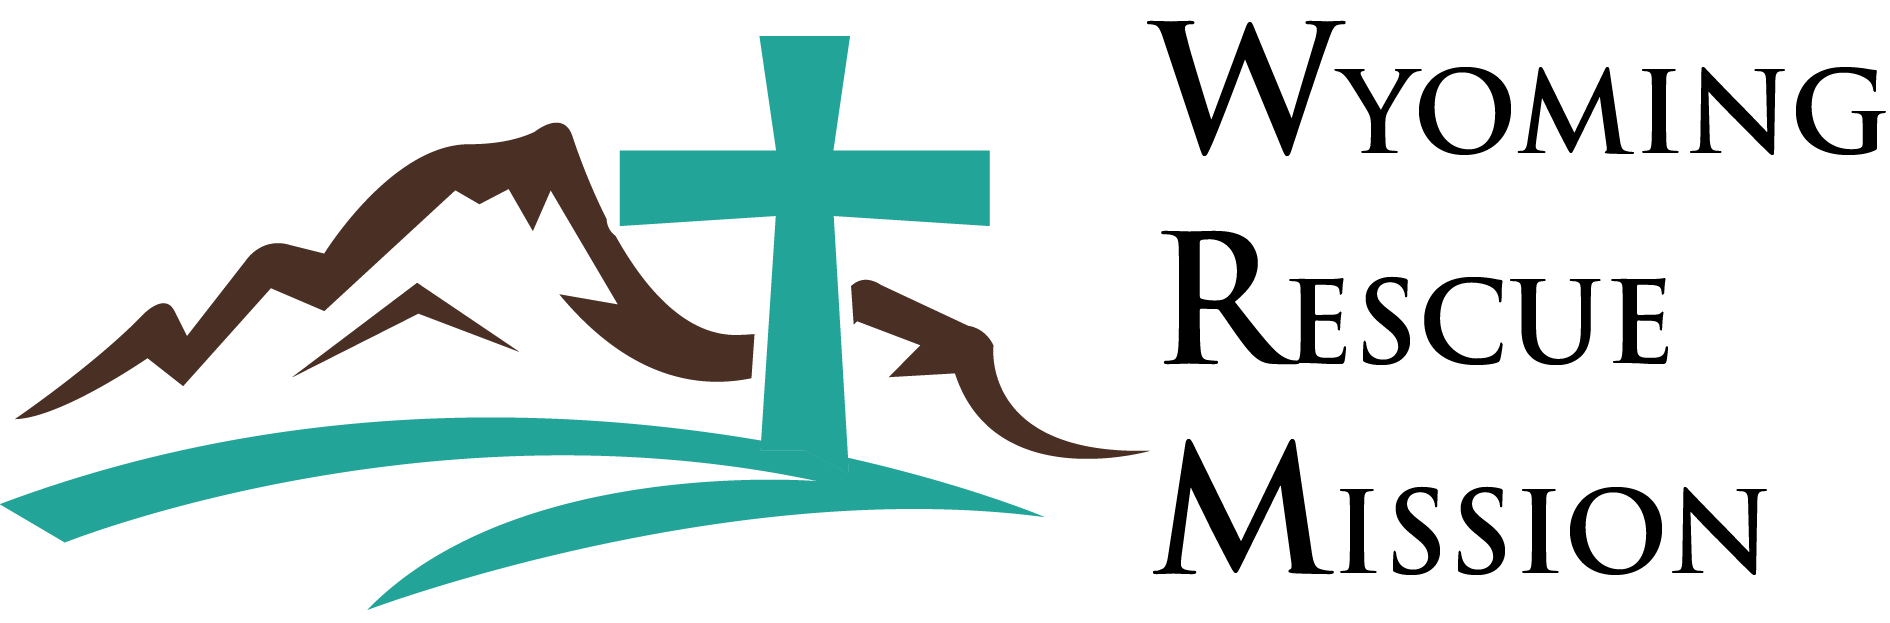 Wyoming Rescue Mission